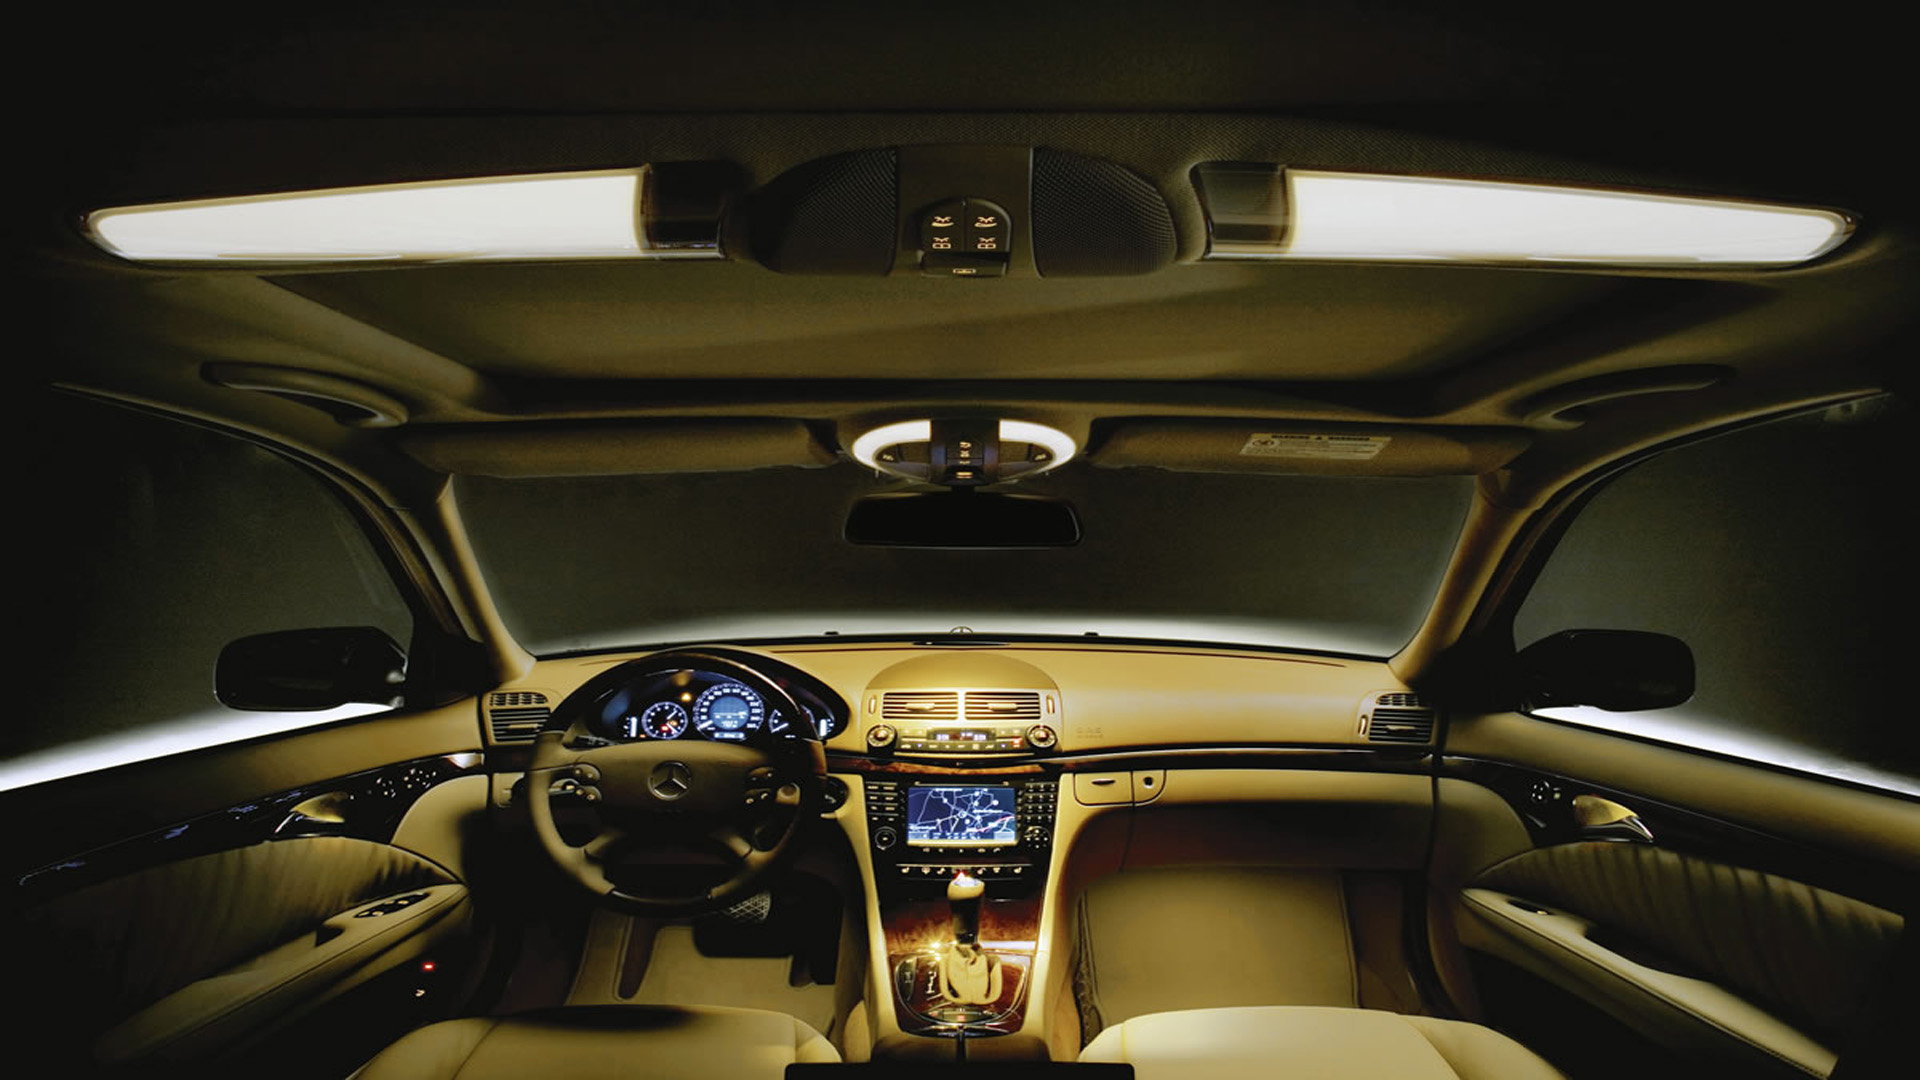 Per ourselves Equip Mercedes-Benz E-Class: How to Install Interior LED Lights | Mbworld